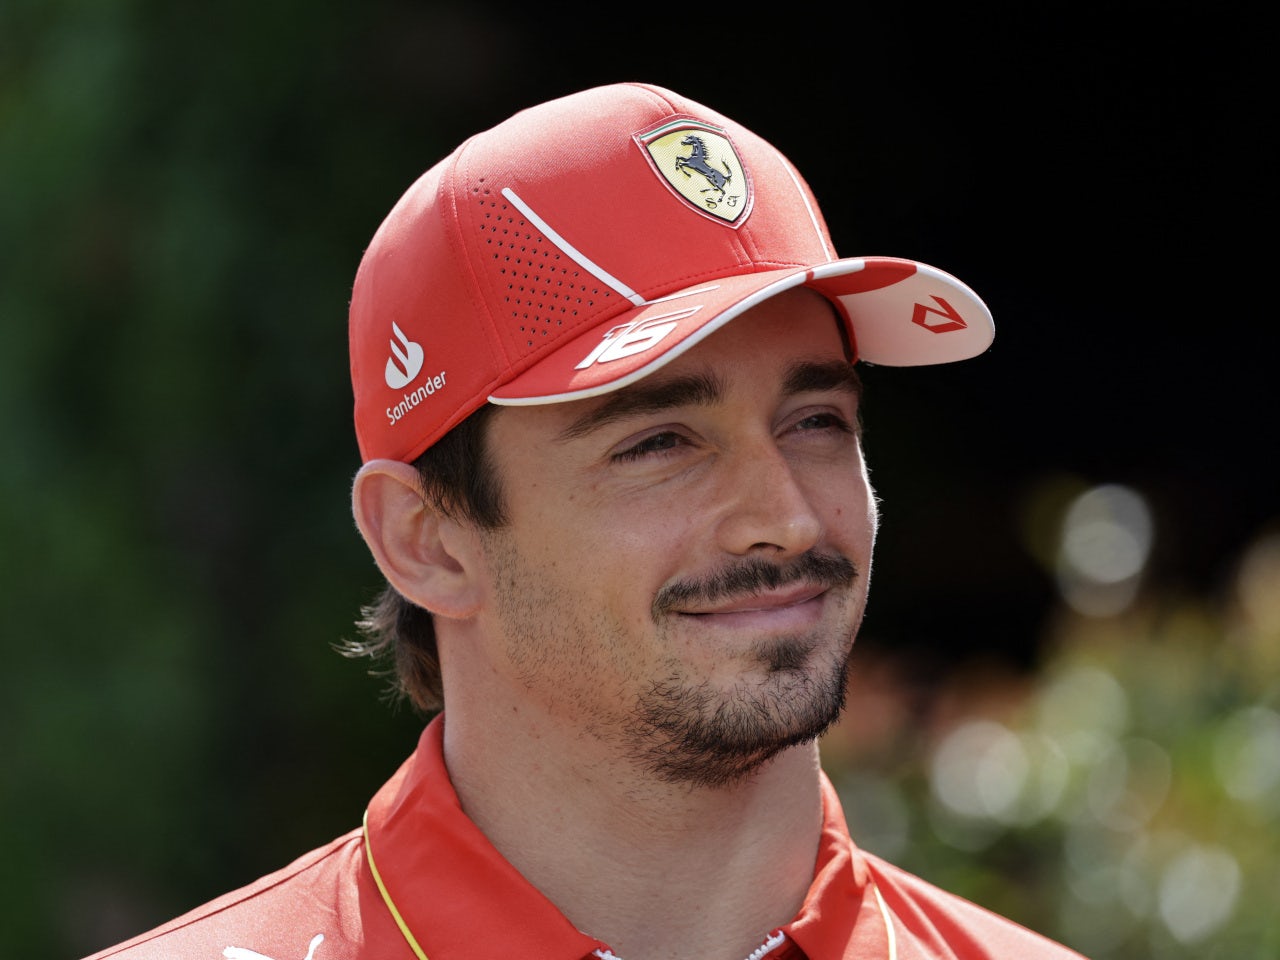 Charles Leclerc secures pole for Belgian Grand Prix, benefits from regulations